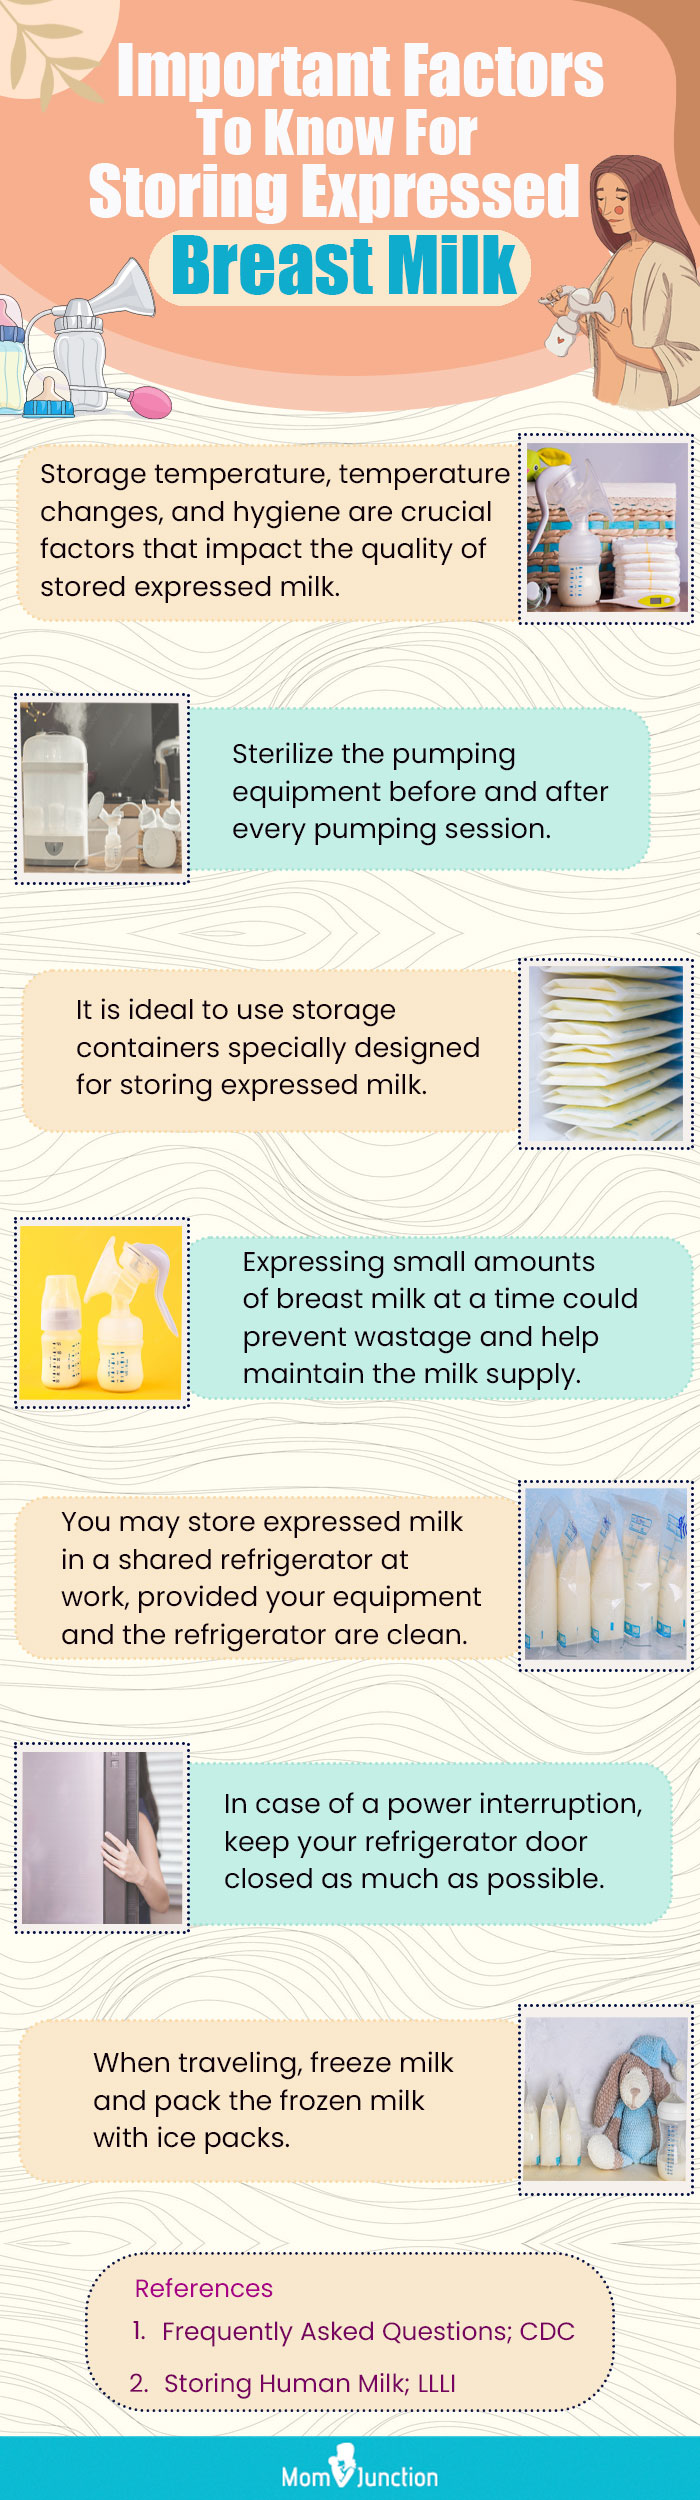 https://www.momjunction.com/wp-content/uploads/2021/06/Important-Factors-To-Know-For-Storing-Expressed-Breast-Milk.jpg